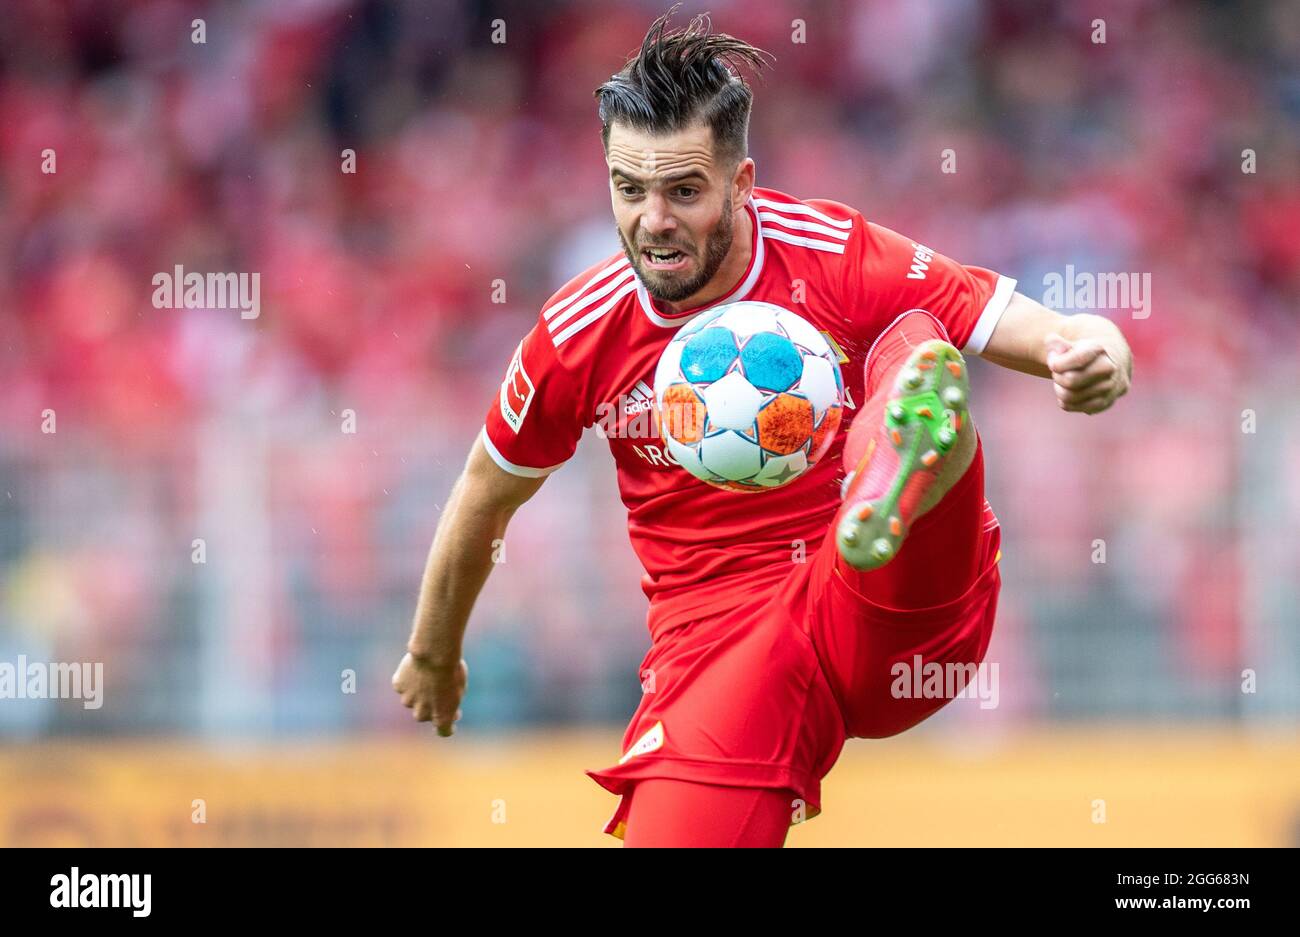 Berlin, Germany. 29th Aug, 2021. Football: Bundesliga, 1. FC Union Berlin - Borussia Mönchengladbach, Matchday 3, An der Alten Försterei. Union's Niko Gießelmann jumps for the ball. Credit: Andreas Gora/dpa - IMPORTANT NOTE: In accordance with the regulations of the DFL Deutsche Fußball Liga and/or the DFB Deutscher Fußball-Bund, it is prohibited to use or have used photographs taken in the stadium and/or of the match in the form of sequence pictures and/or video-like photo series./dpa/Alamy Live News Stock Photo